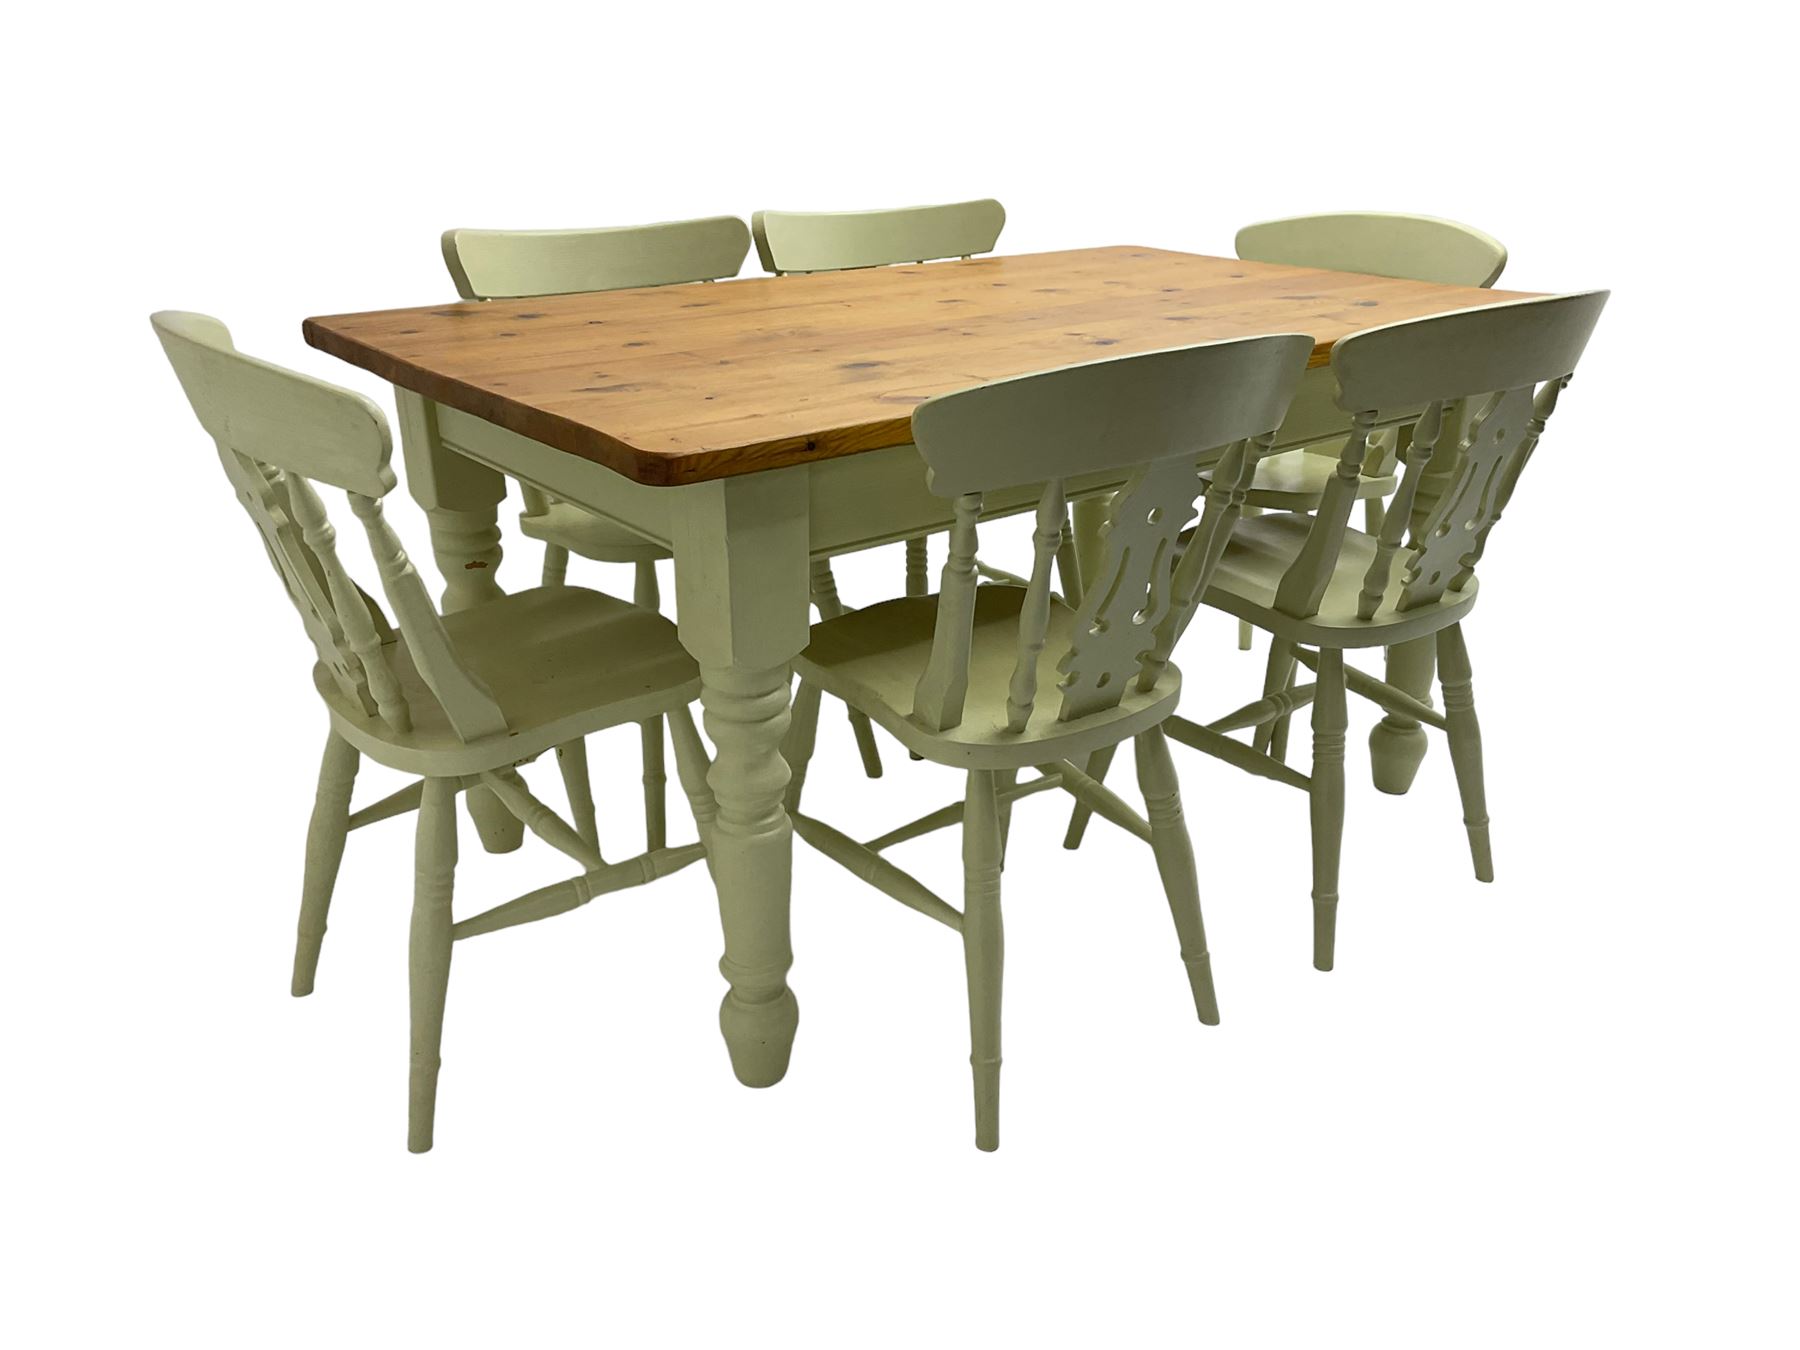 Traditional farmhouse pine dining table - Image 3 of 9